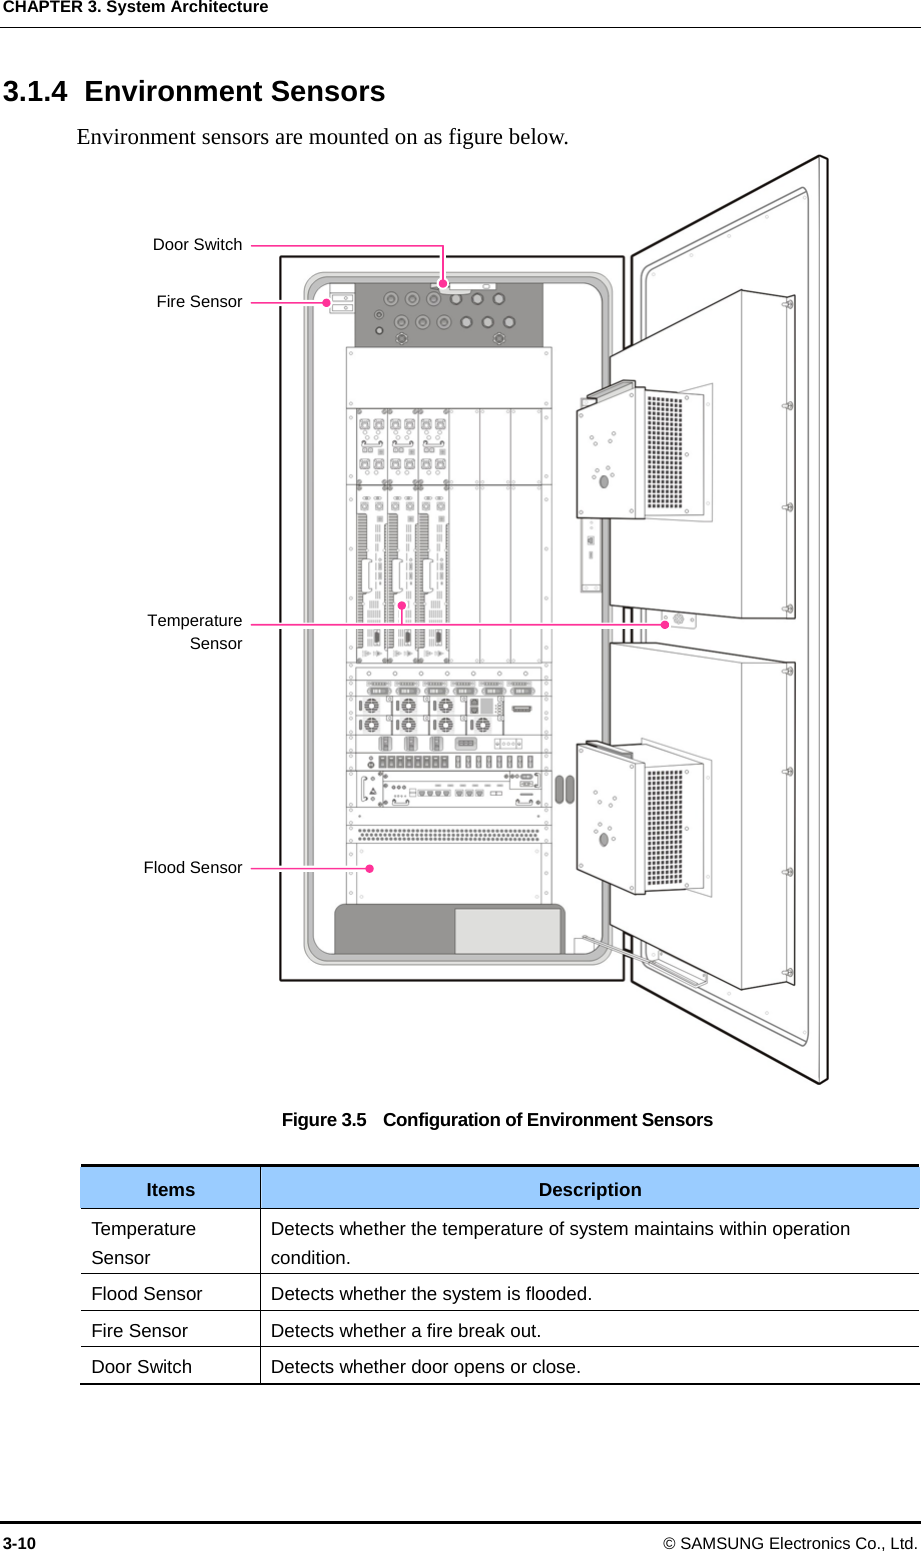 CHAPTER 3. System Architecture 3-10  © SAMSUNG Electronics Co., Ltd. 3.1.4 Environment Sensors Environment sensors are mounted on as figure below. Figure 3.5    Configuration of Environment Sensors  Items  Description Temperature Sensor Detects whether the temperature of system maintains within operation condition. Flood Sensor  Detects whether the system is flooded. Fire Sensor  Detects whether a fire break out. Door Switch  Detects whether door opens or close.  Door Switch Fire Sensor Temperature Sensor Flood Sensor 